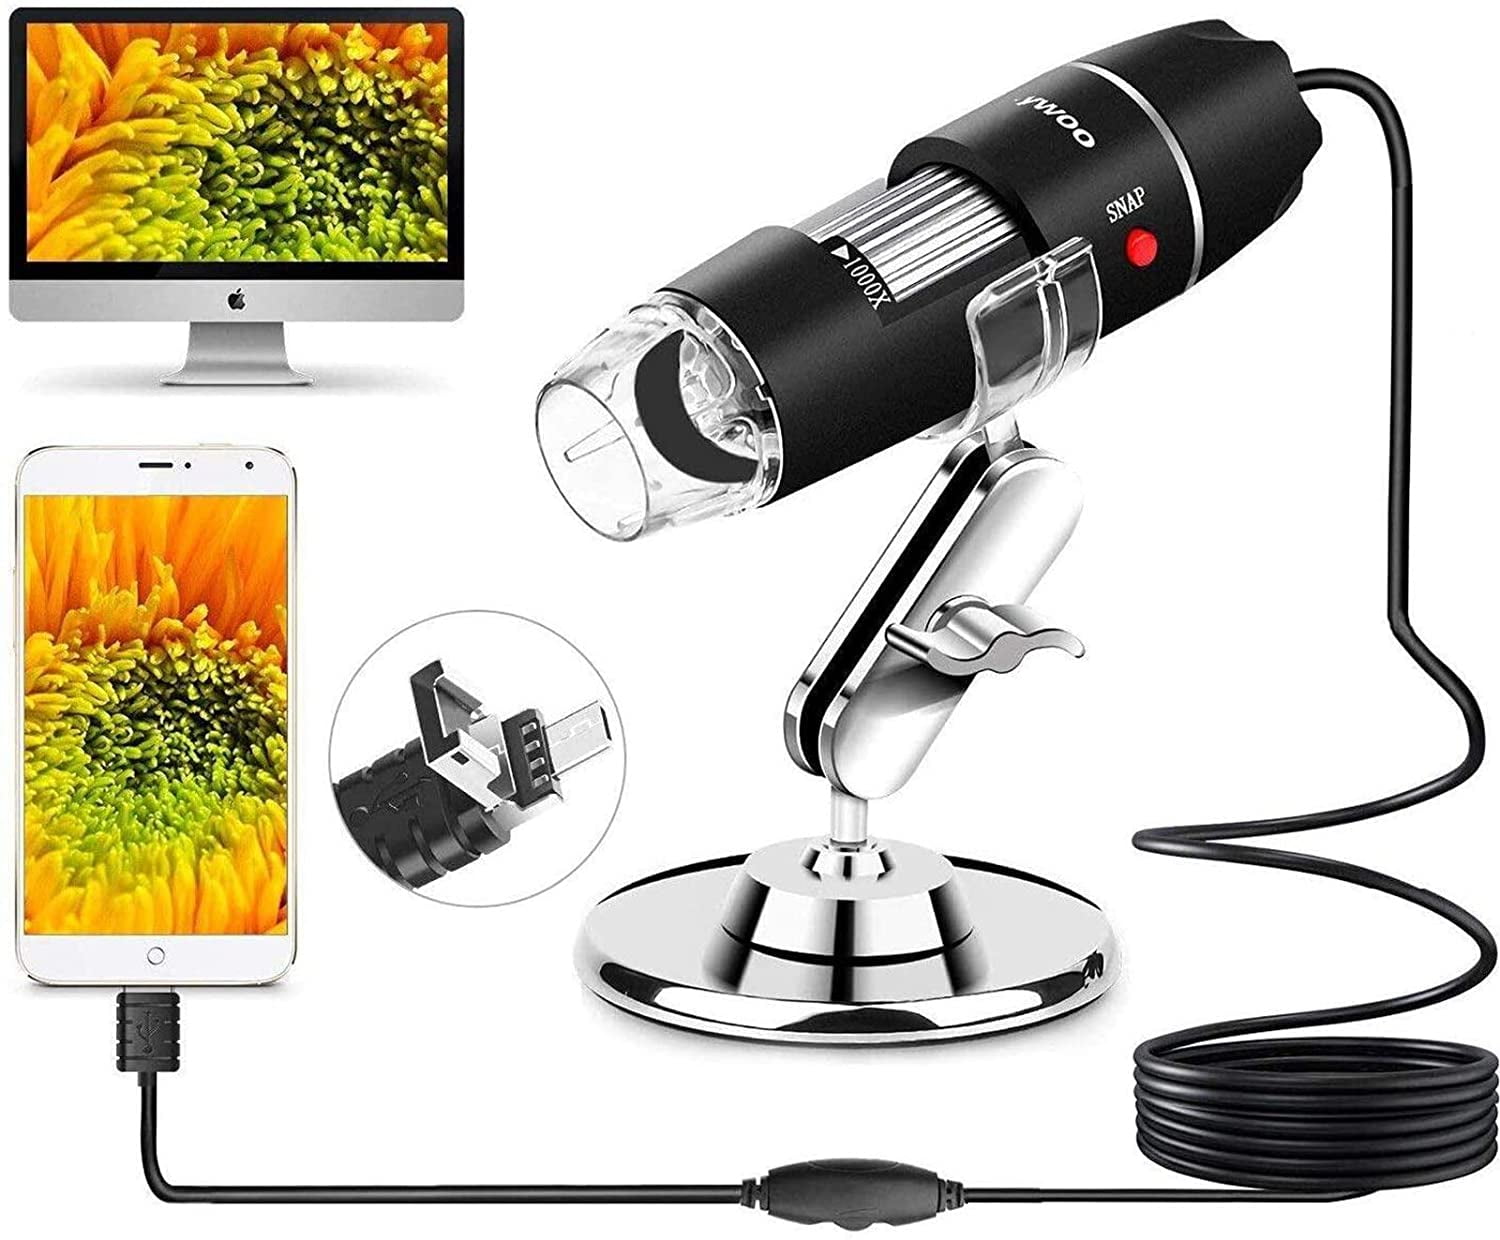 Digital Microscope,STPCTOU 40 to 1000x Magnification Endoscope 8 LED Mini Camera with OTG Adapter and Metal Stand Compatible with Mac Window7 8 10 Android Linux